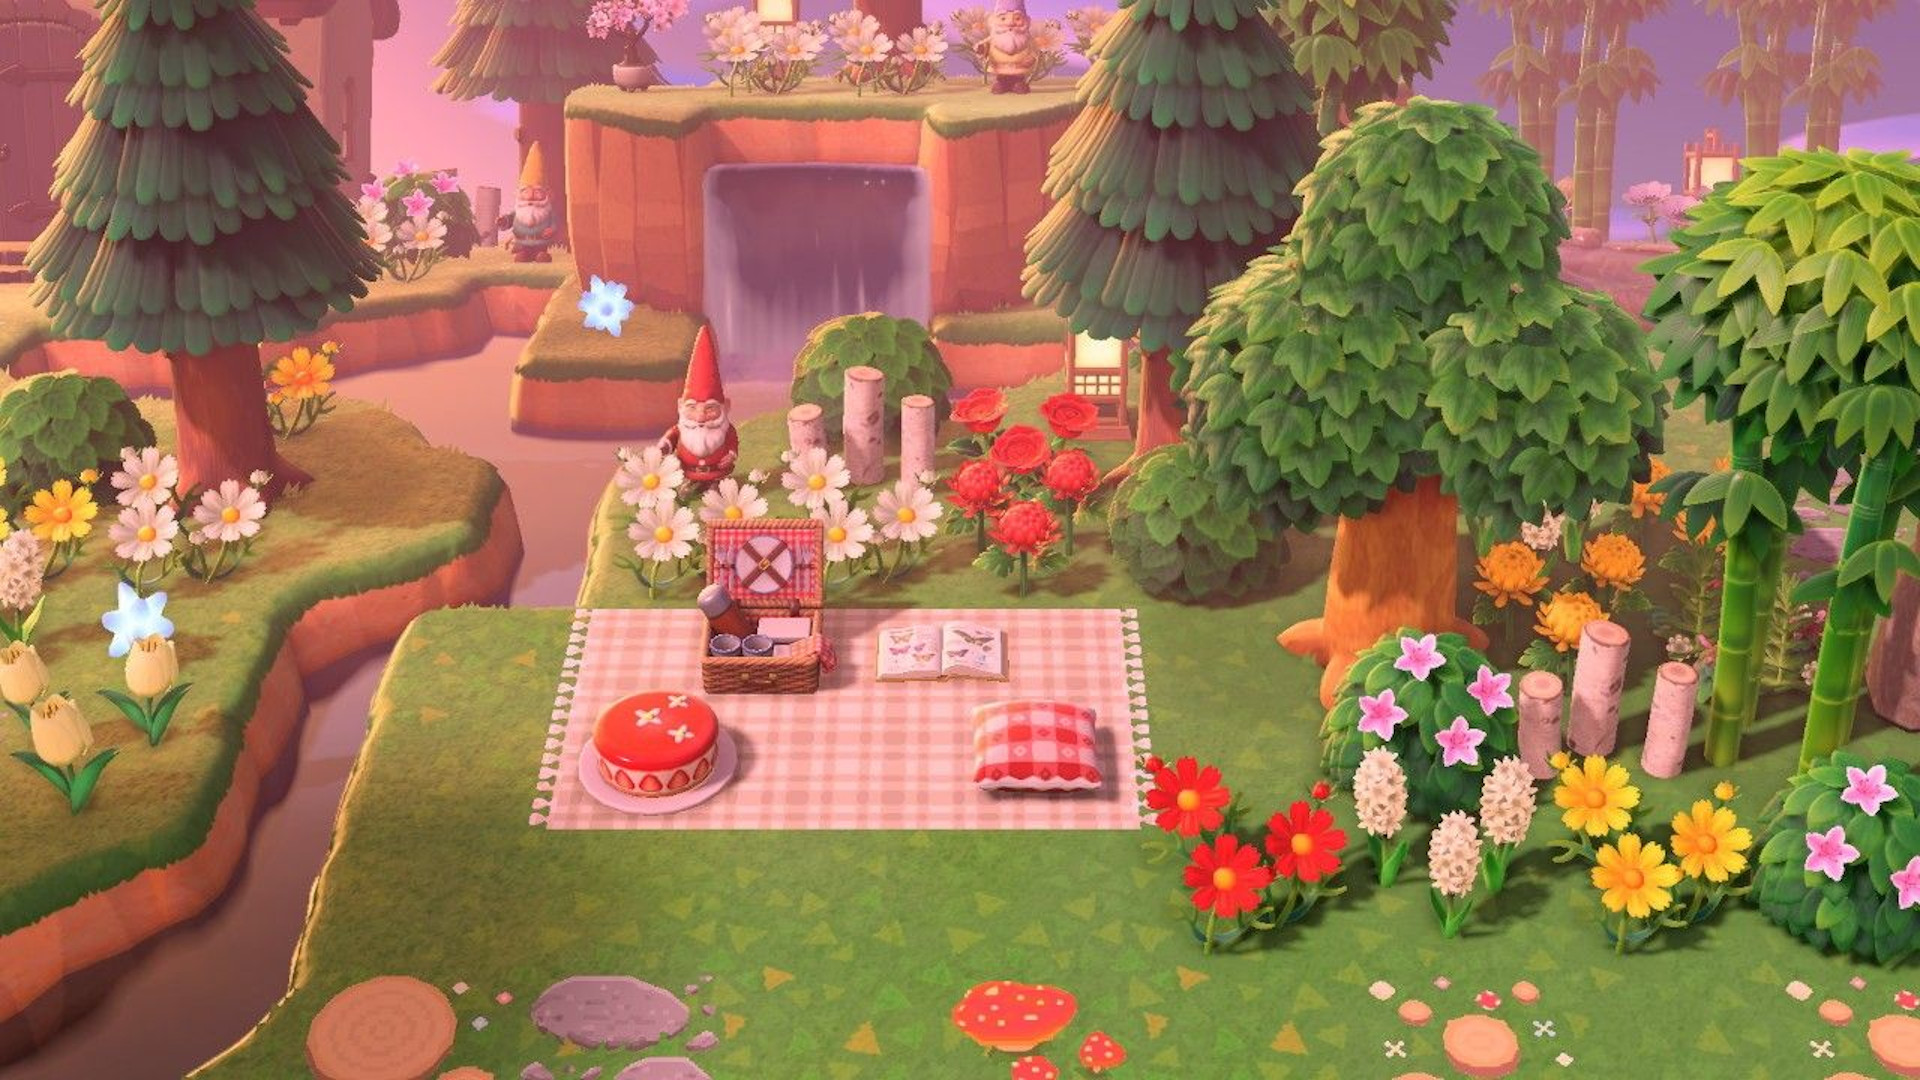 Animal Crossing New Horizons island ideas: A lovely summer picnic setting in an Animal Crossing park.